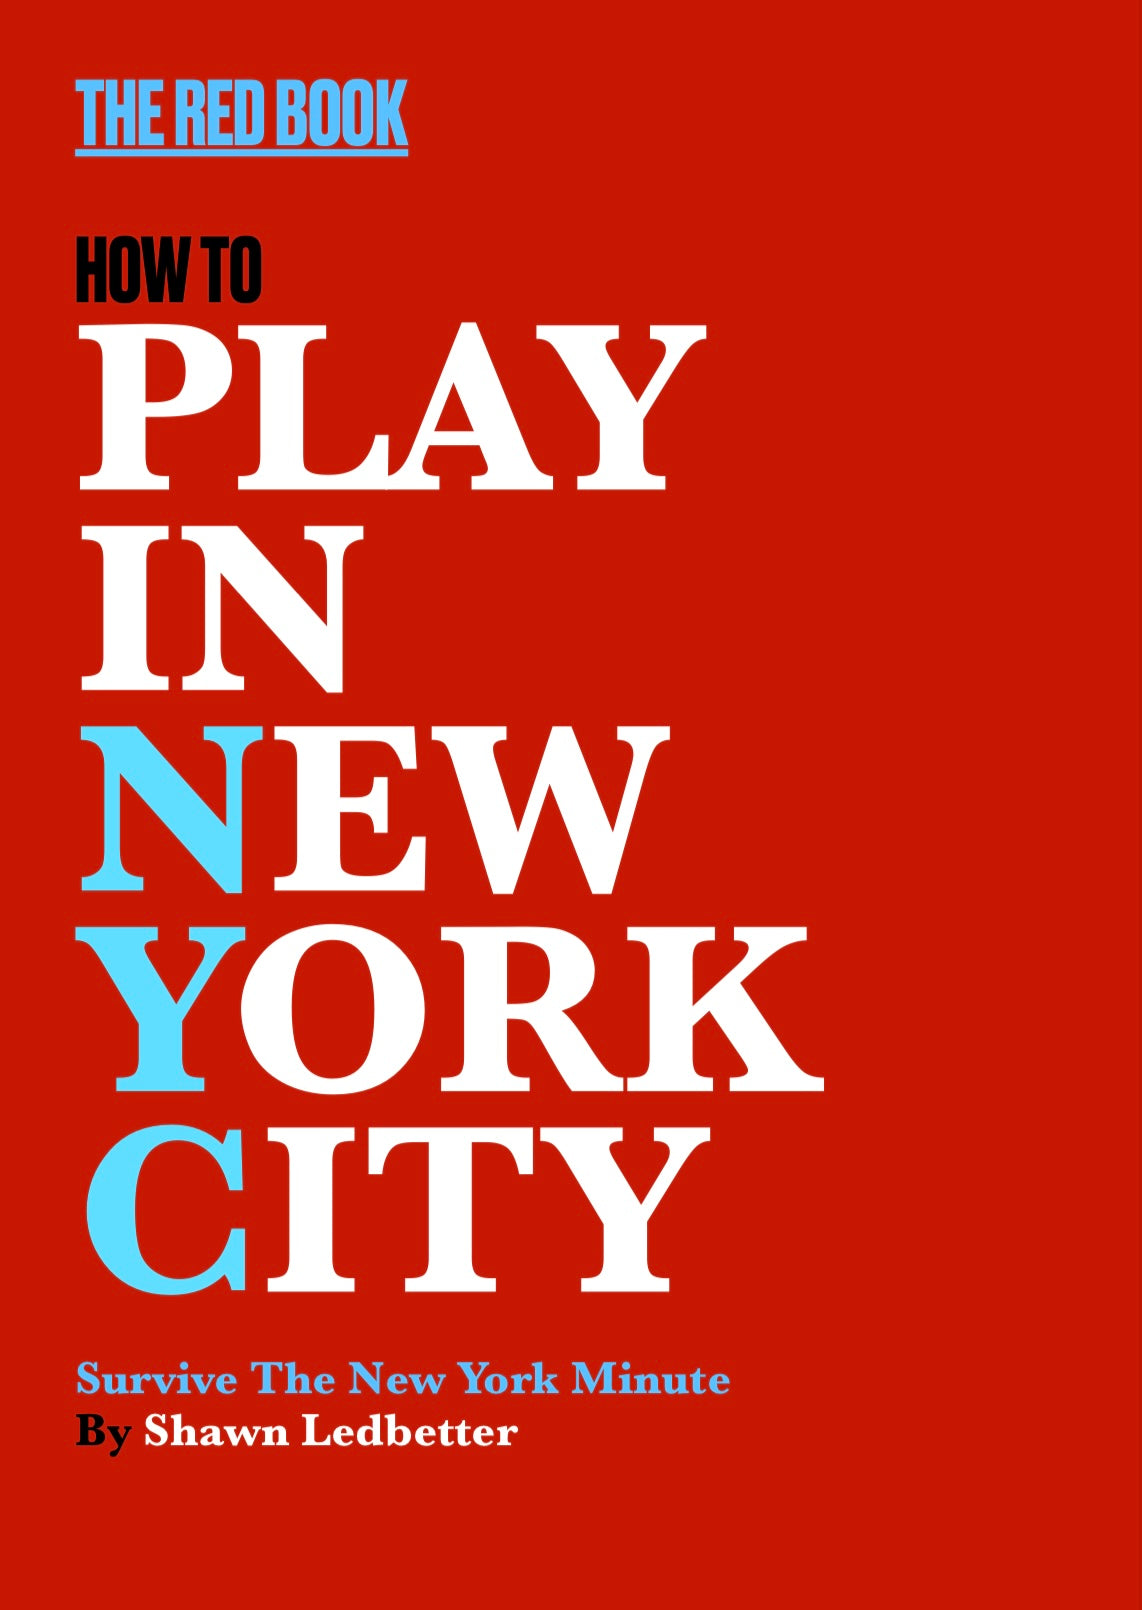 The Red Book- How to Play In New York City